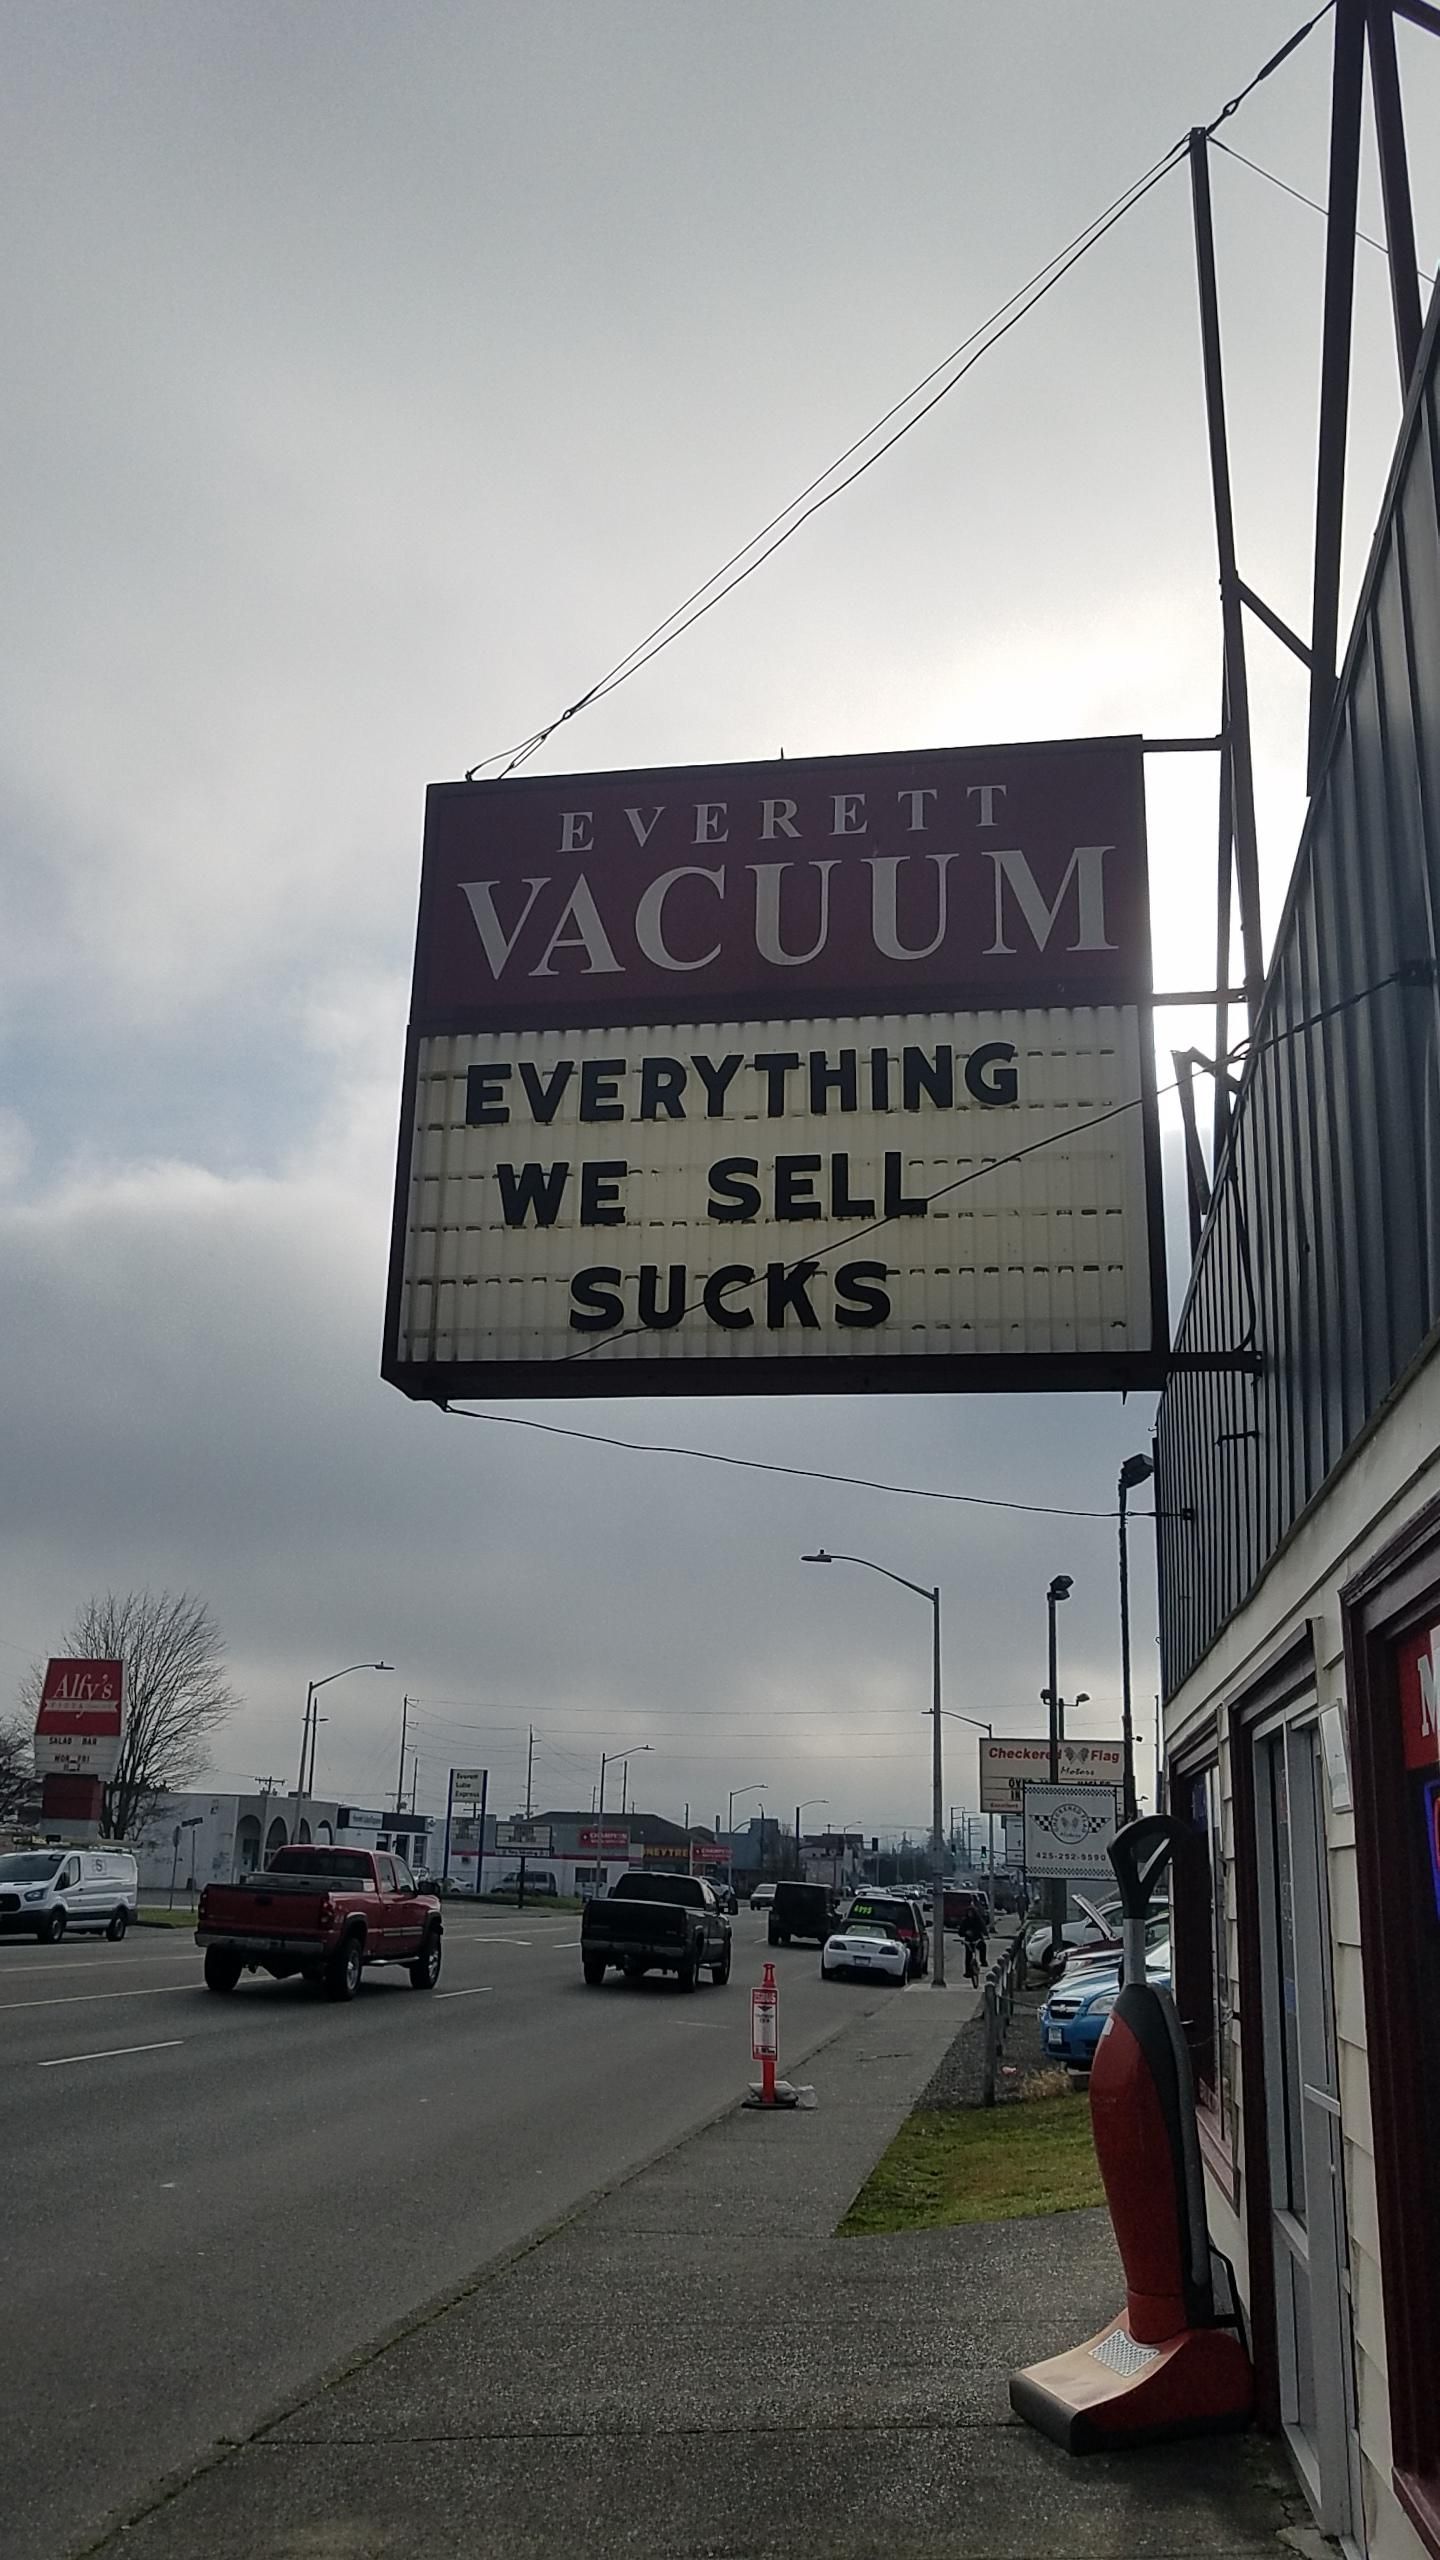 Funny sign for Vacuum store.